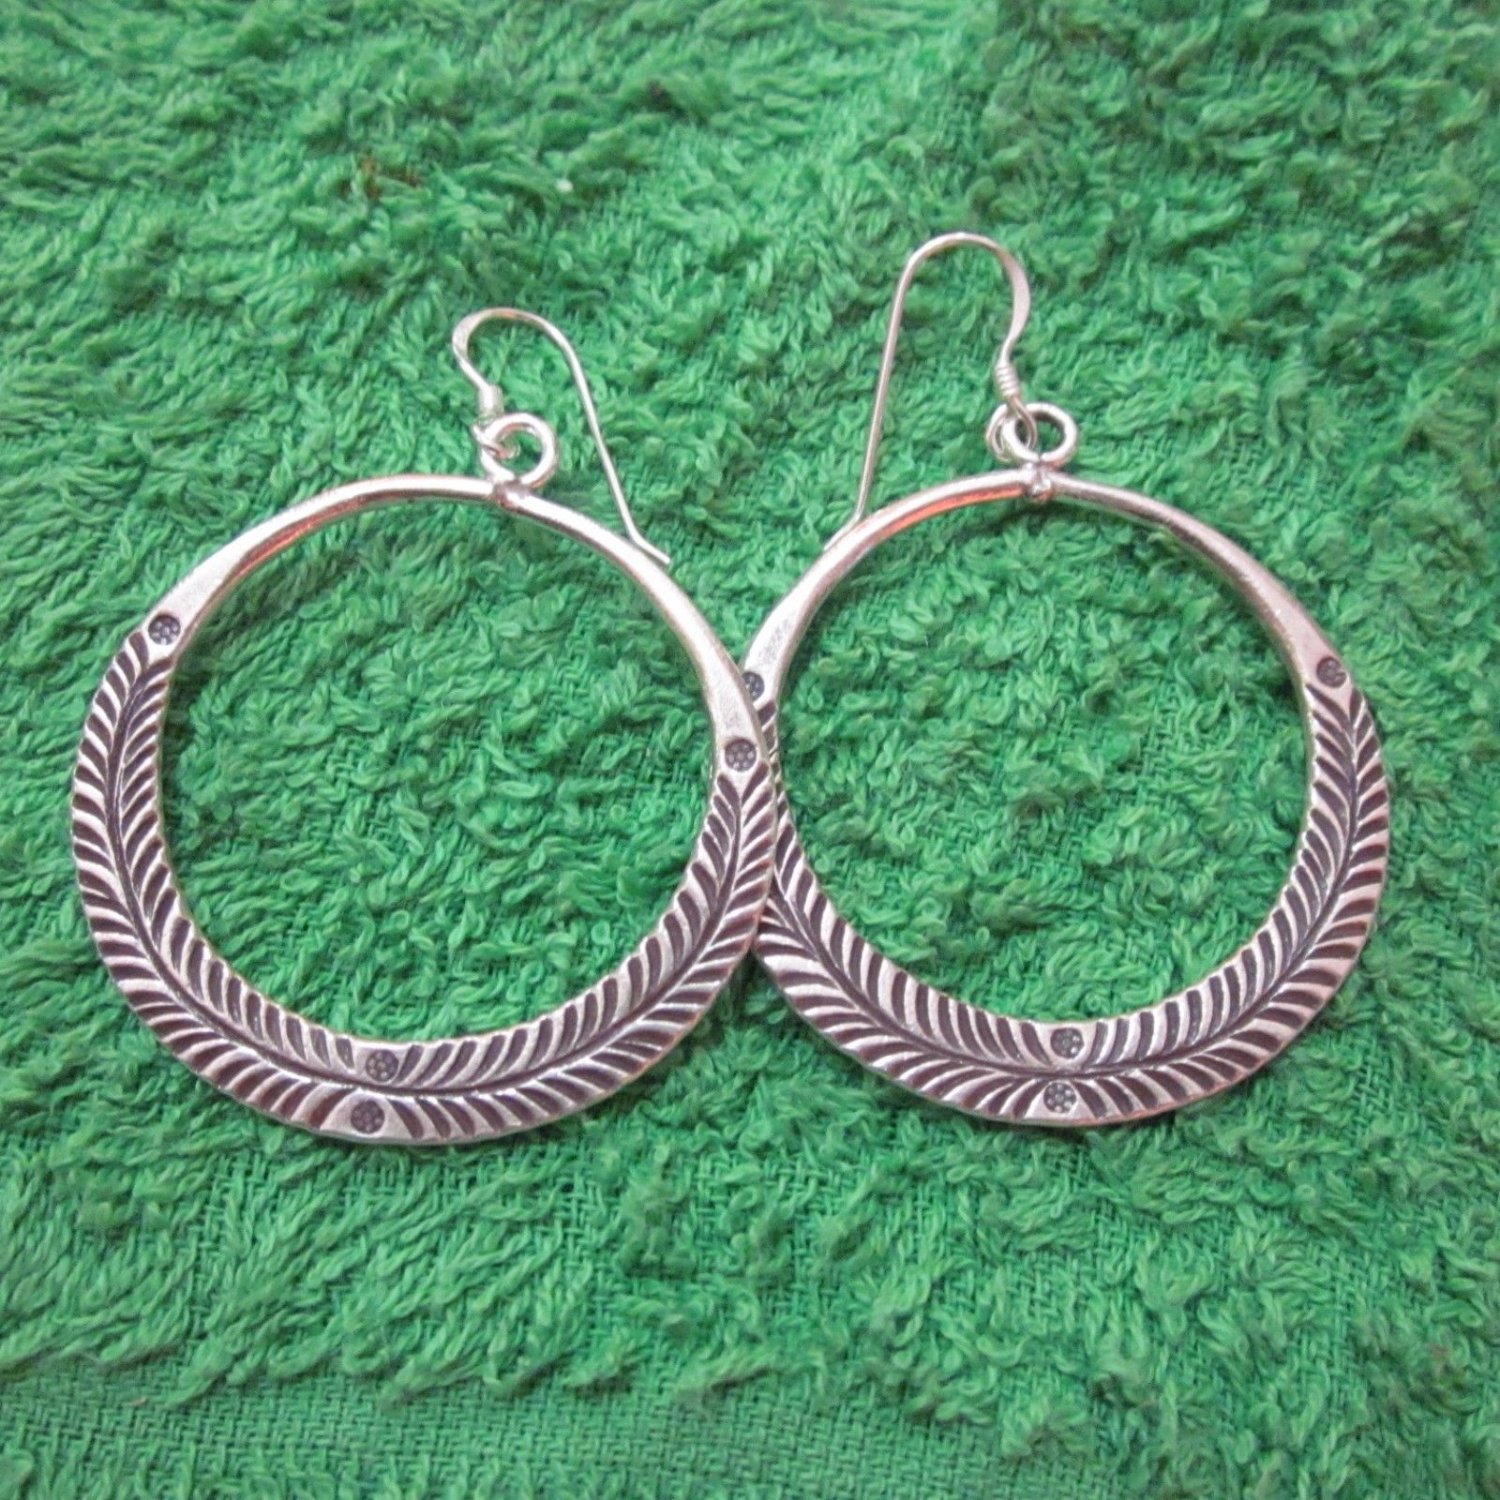 Thai Hill Tribe Earrings Fine Silver Fashions Dangle Engraved Rounds